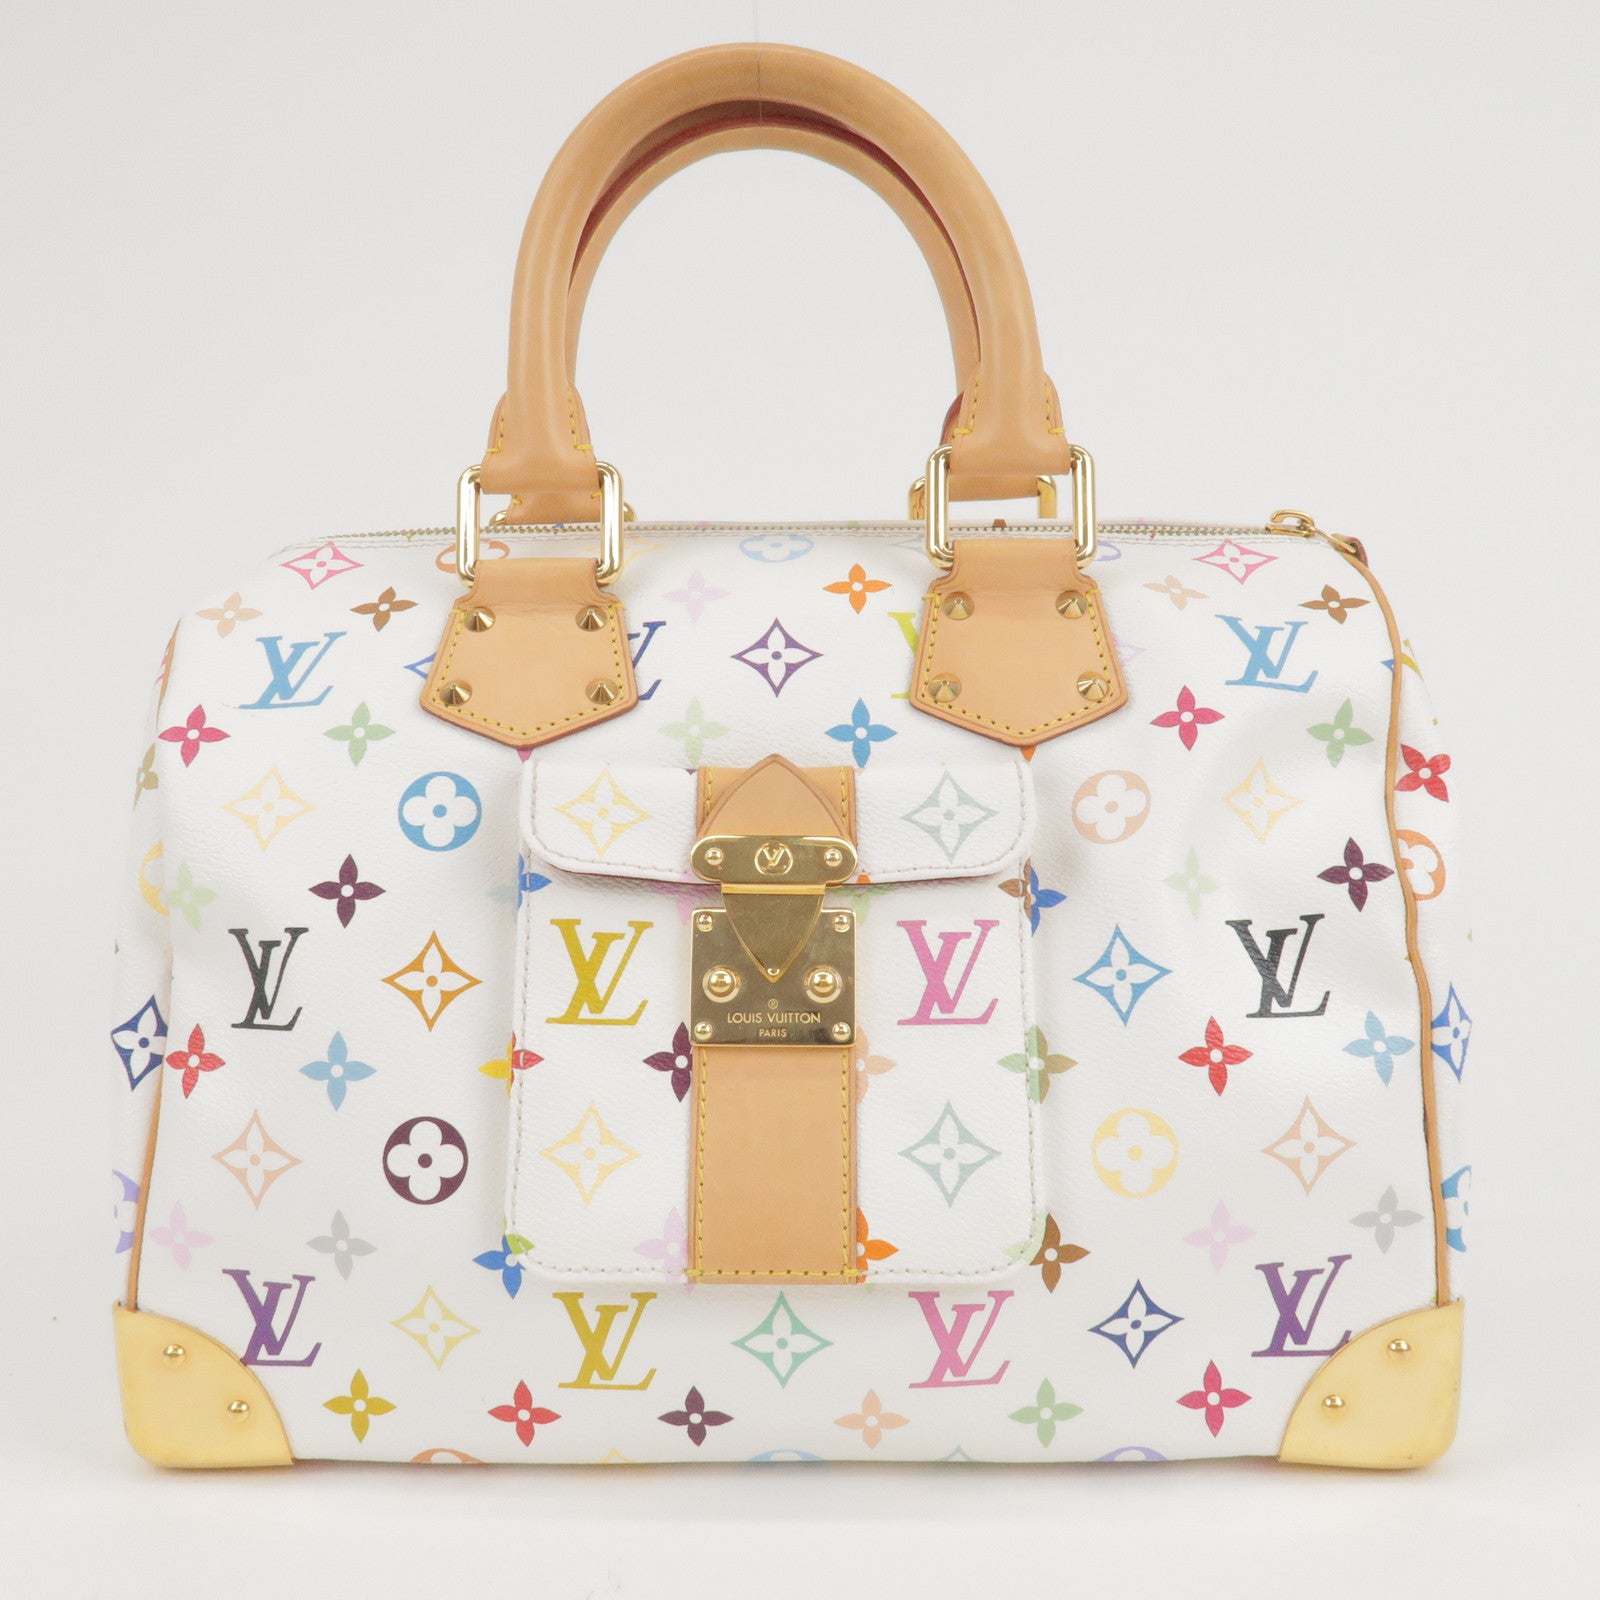 Buy Free Shipping Authentic Pre-owned Louis Vuitton Lv Epi Tassili